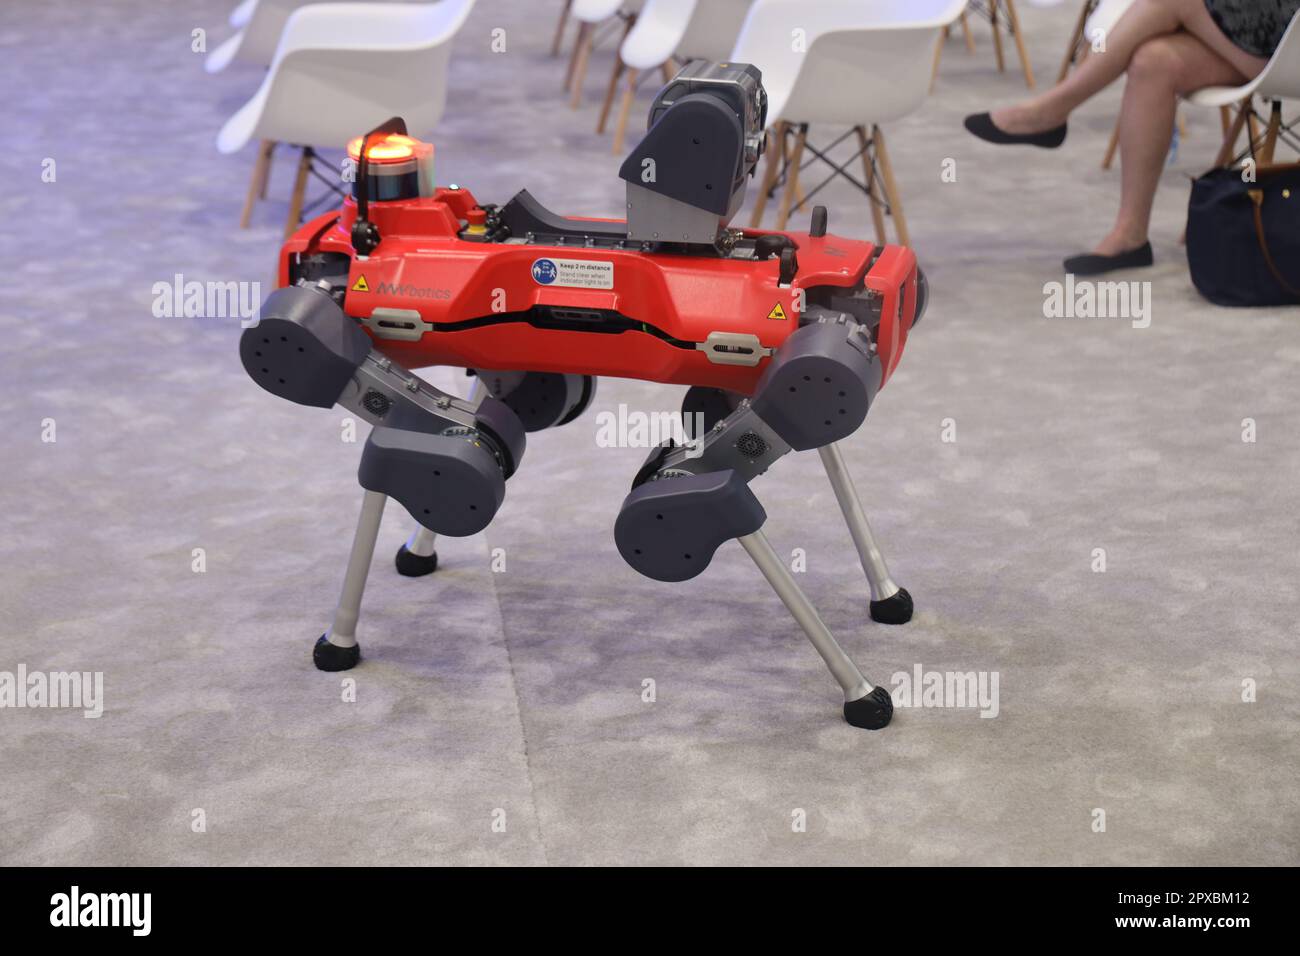 230502) -- HOUSTON, May 2, 2023 (Xinhua) -- A robot dog is displayed at the  Offshore Technology Conference 2023 in Houston, Texas, the United States,  on May 1, 2023. Tens of thousands